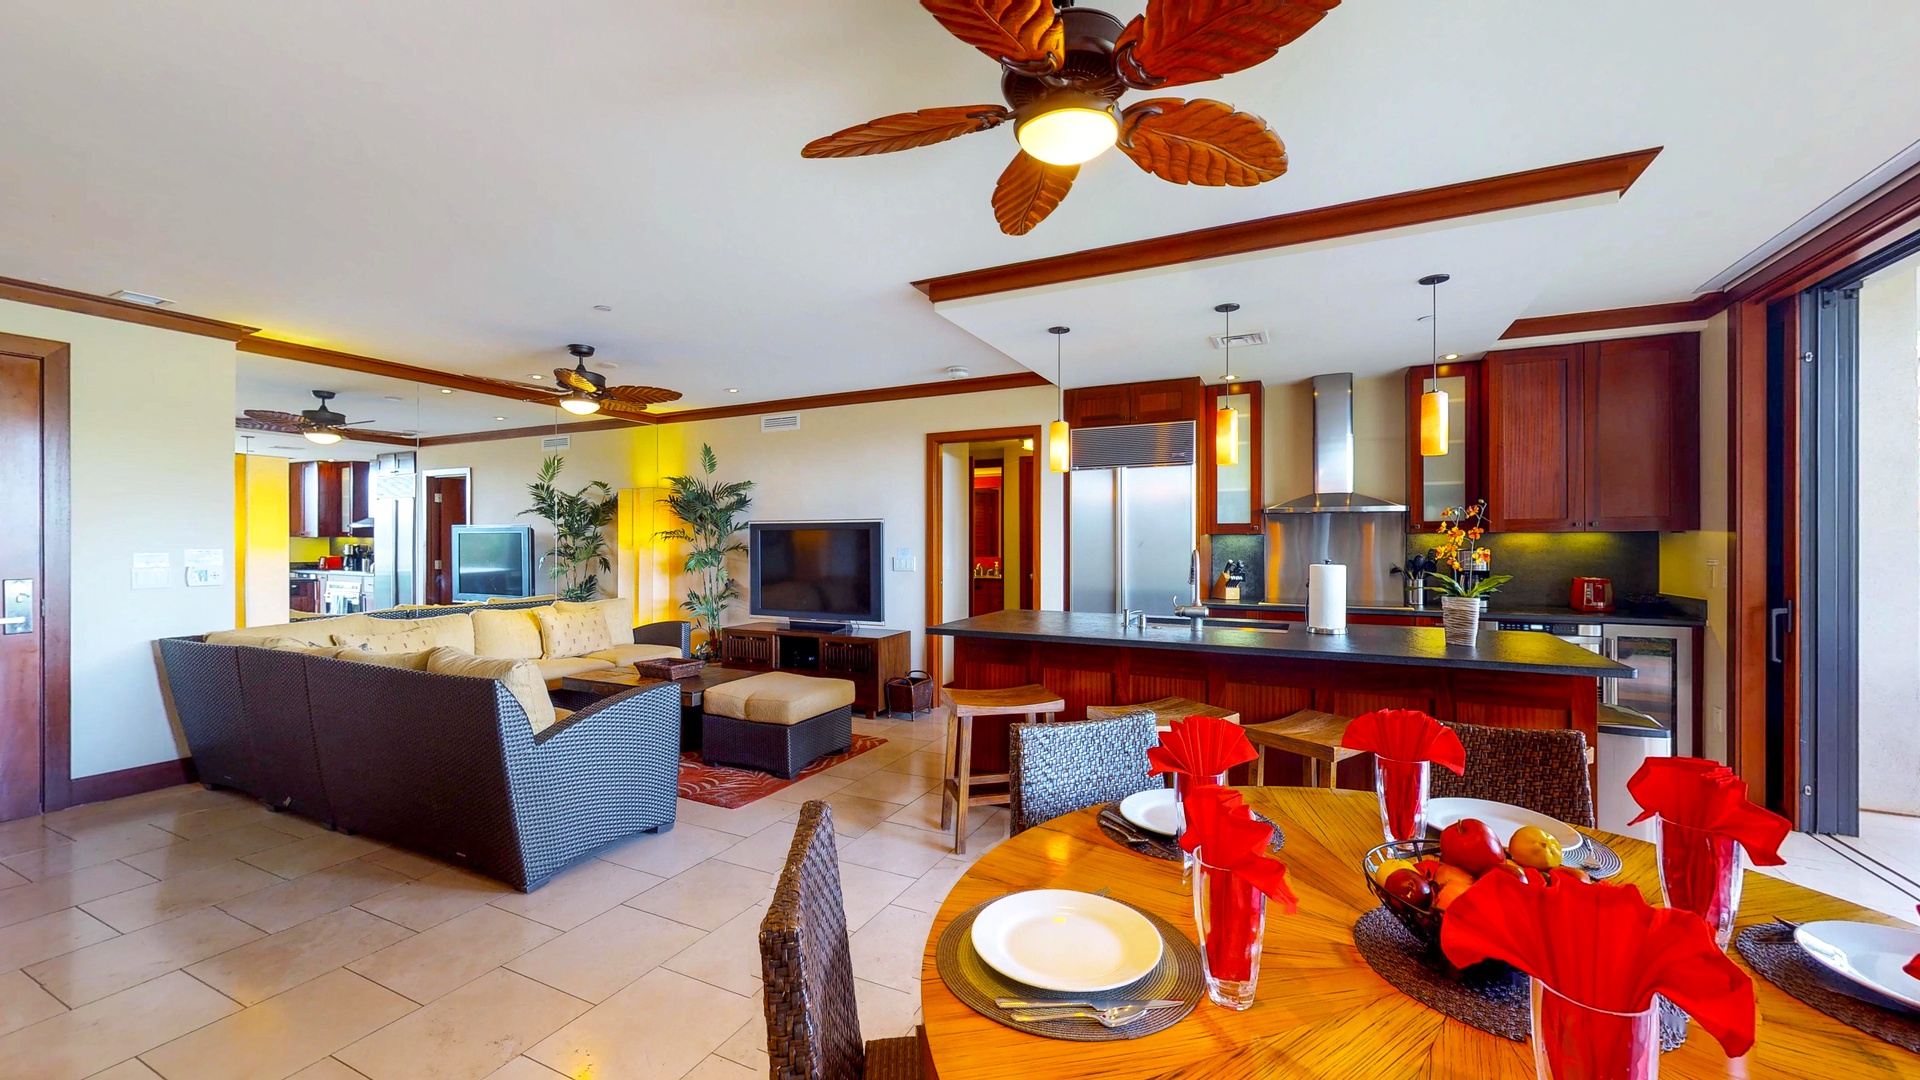 Kapolei Vacation Rentals, Ko Olina Beach Villas B107 - A picture of the entire open floor plan for entertaining.